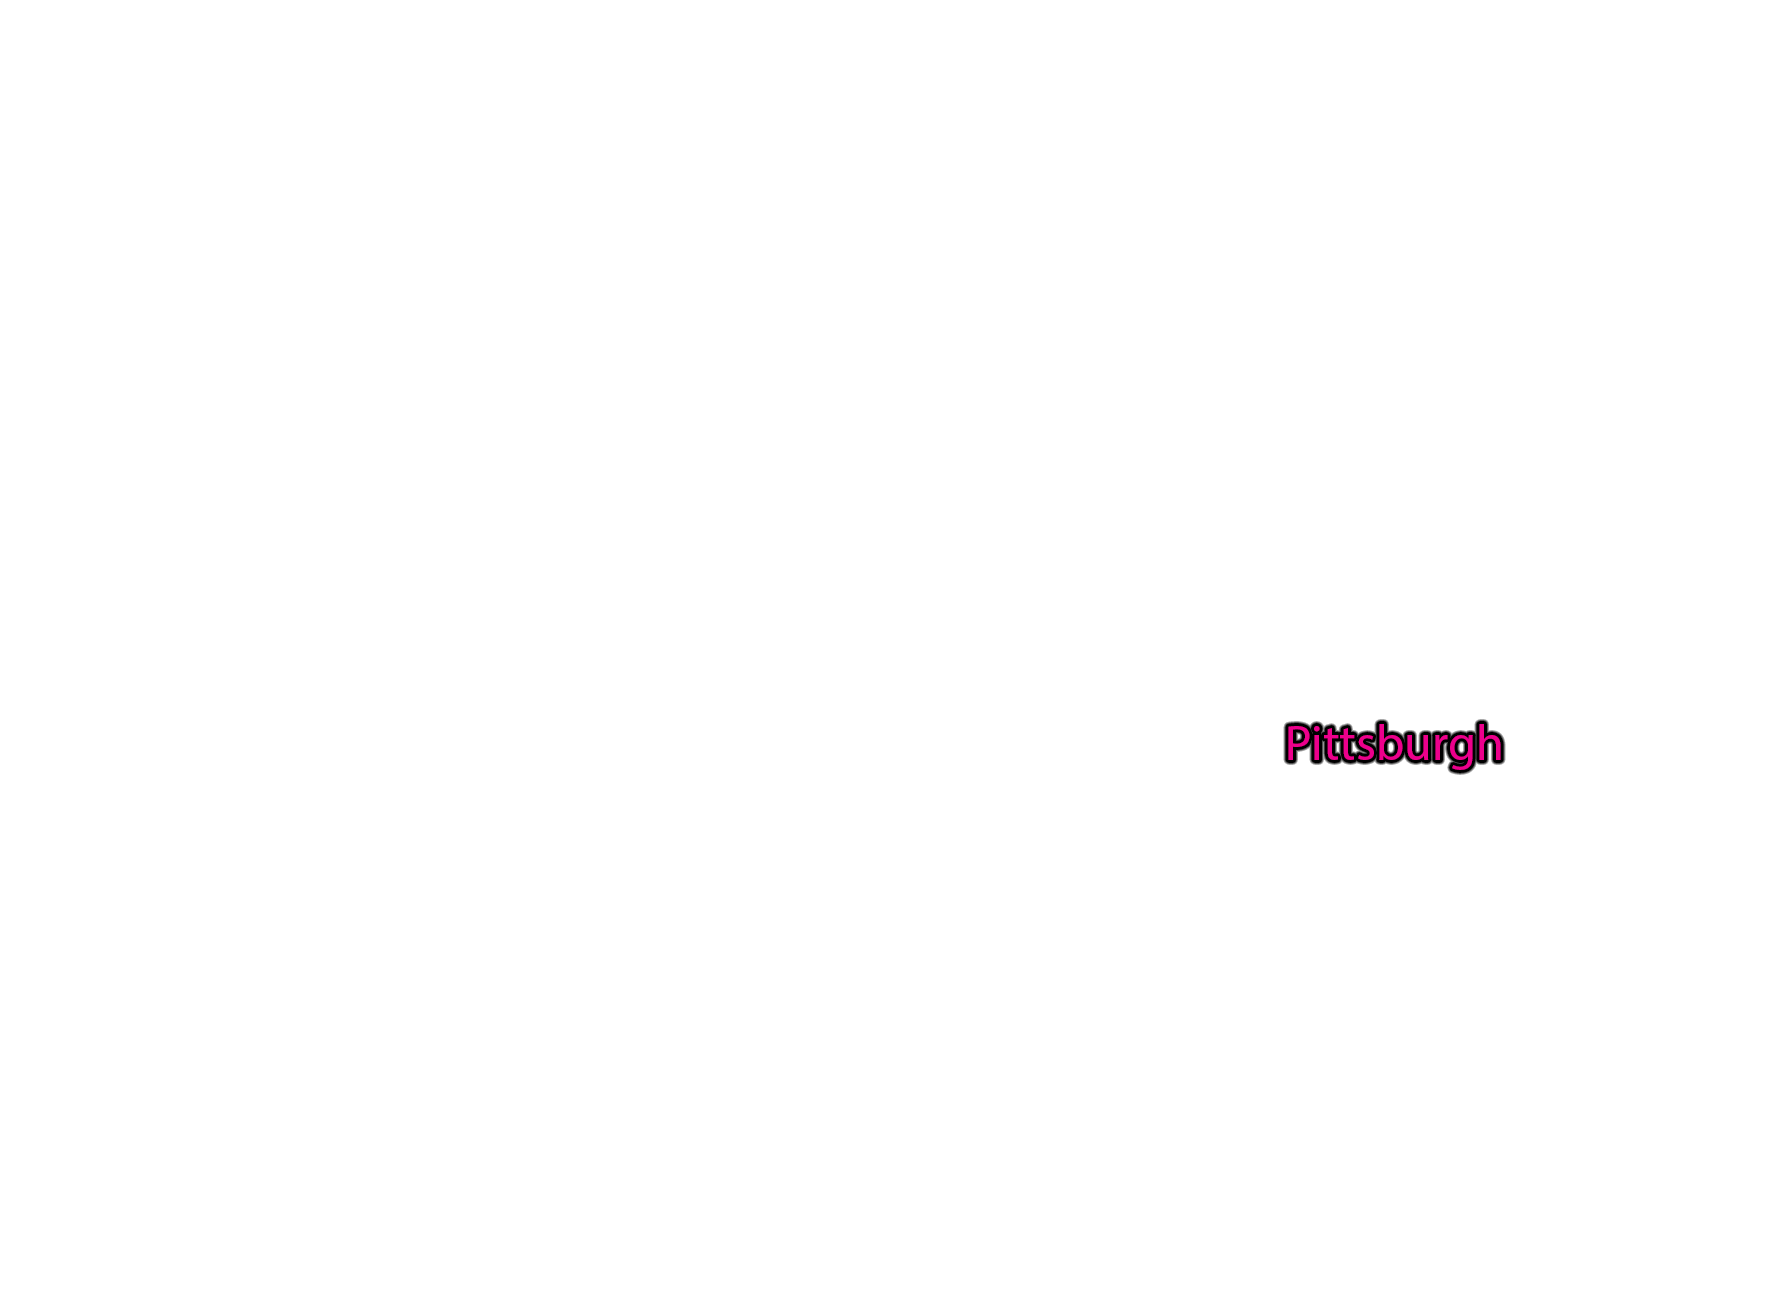 Pittsburgh label with glow